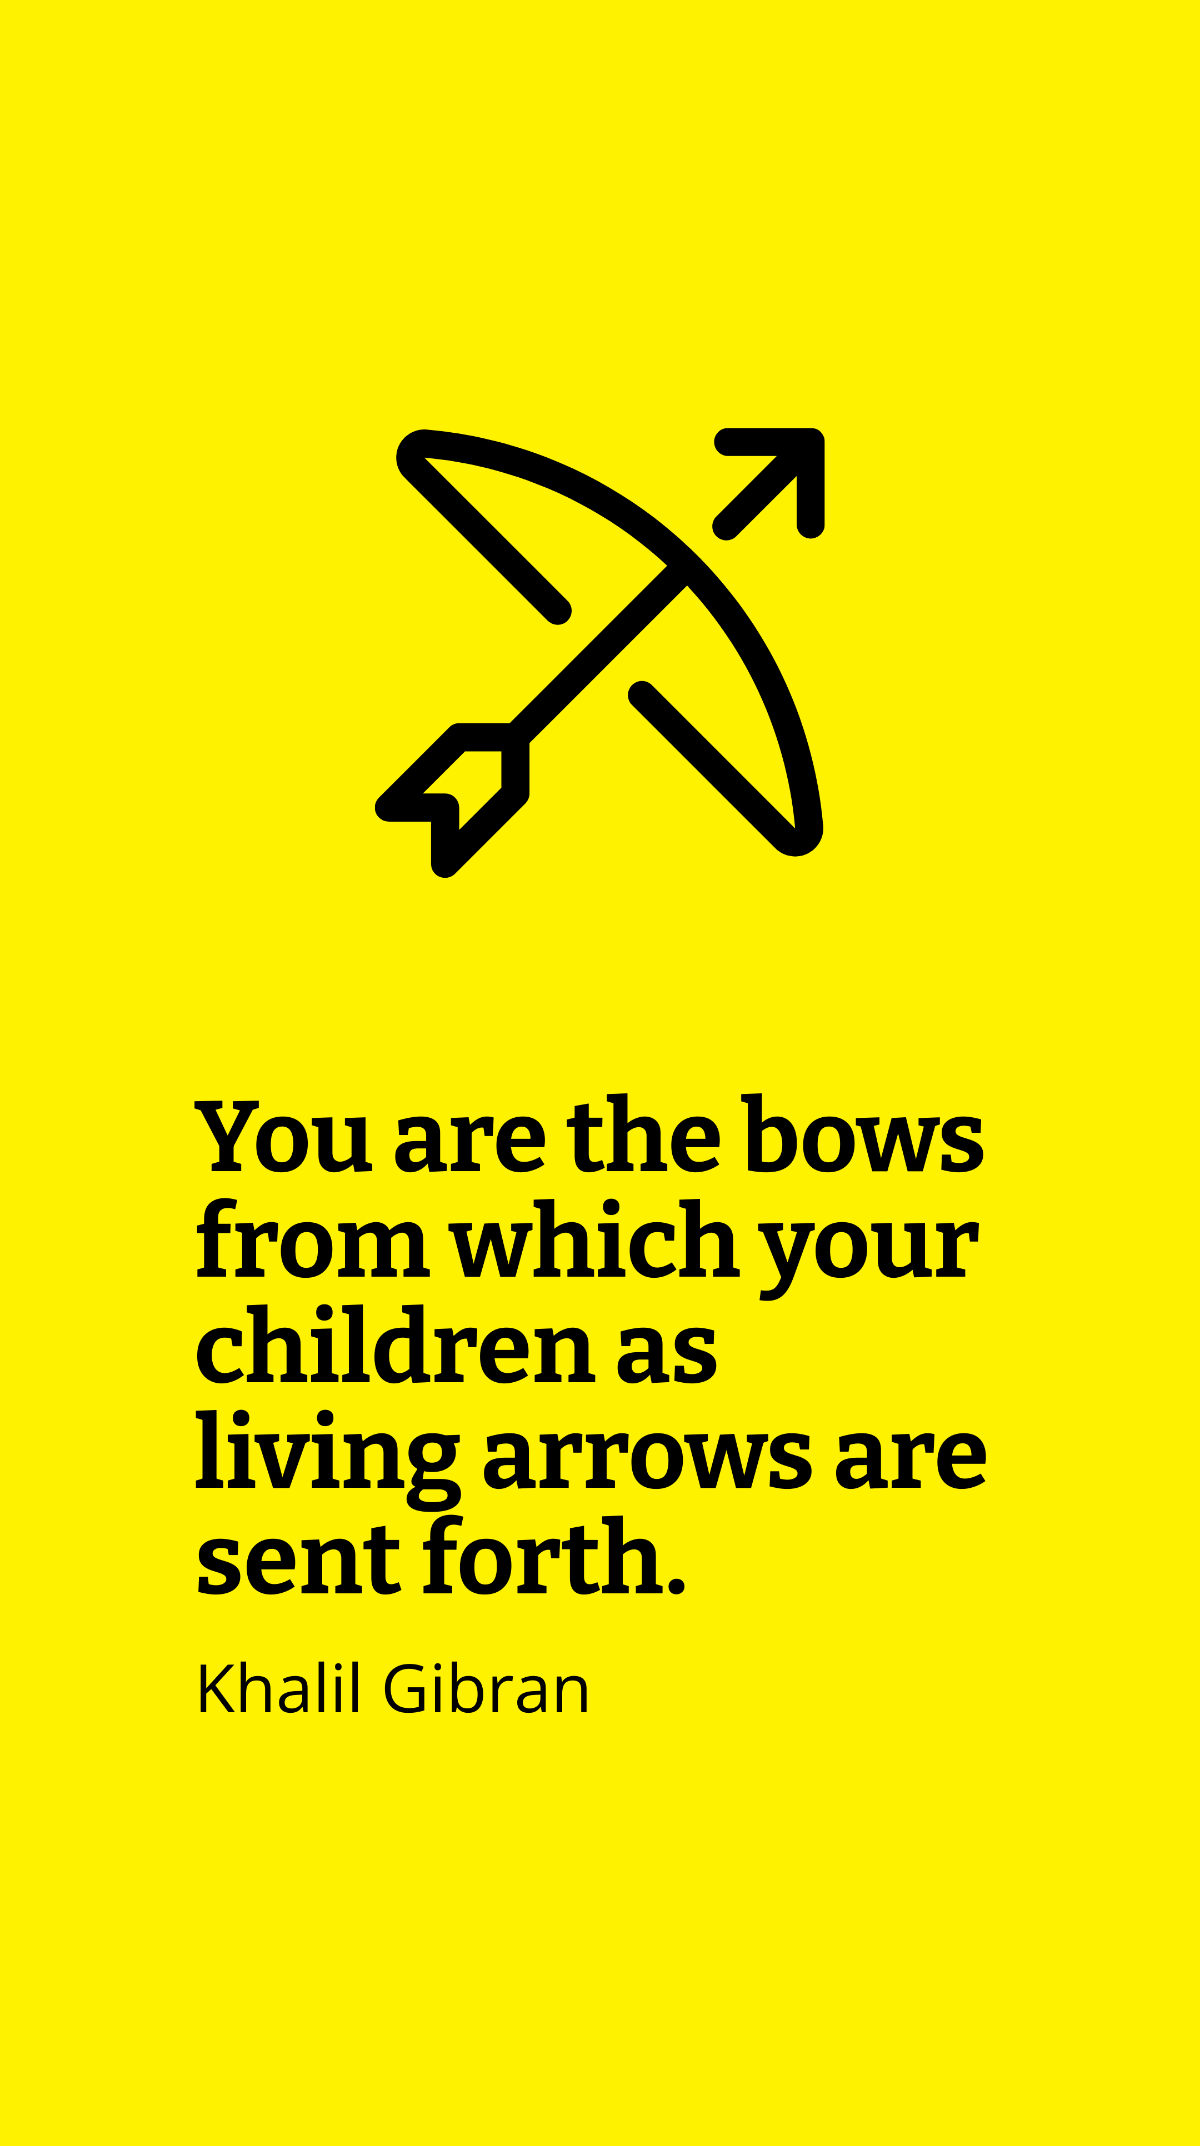 Free Khalil Gibran - You are the bows from which your children as living arrows are sent forth. Template